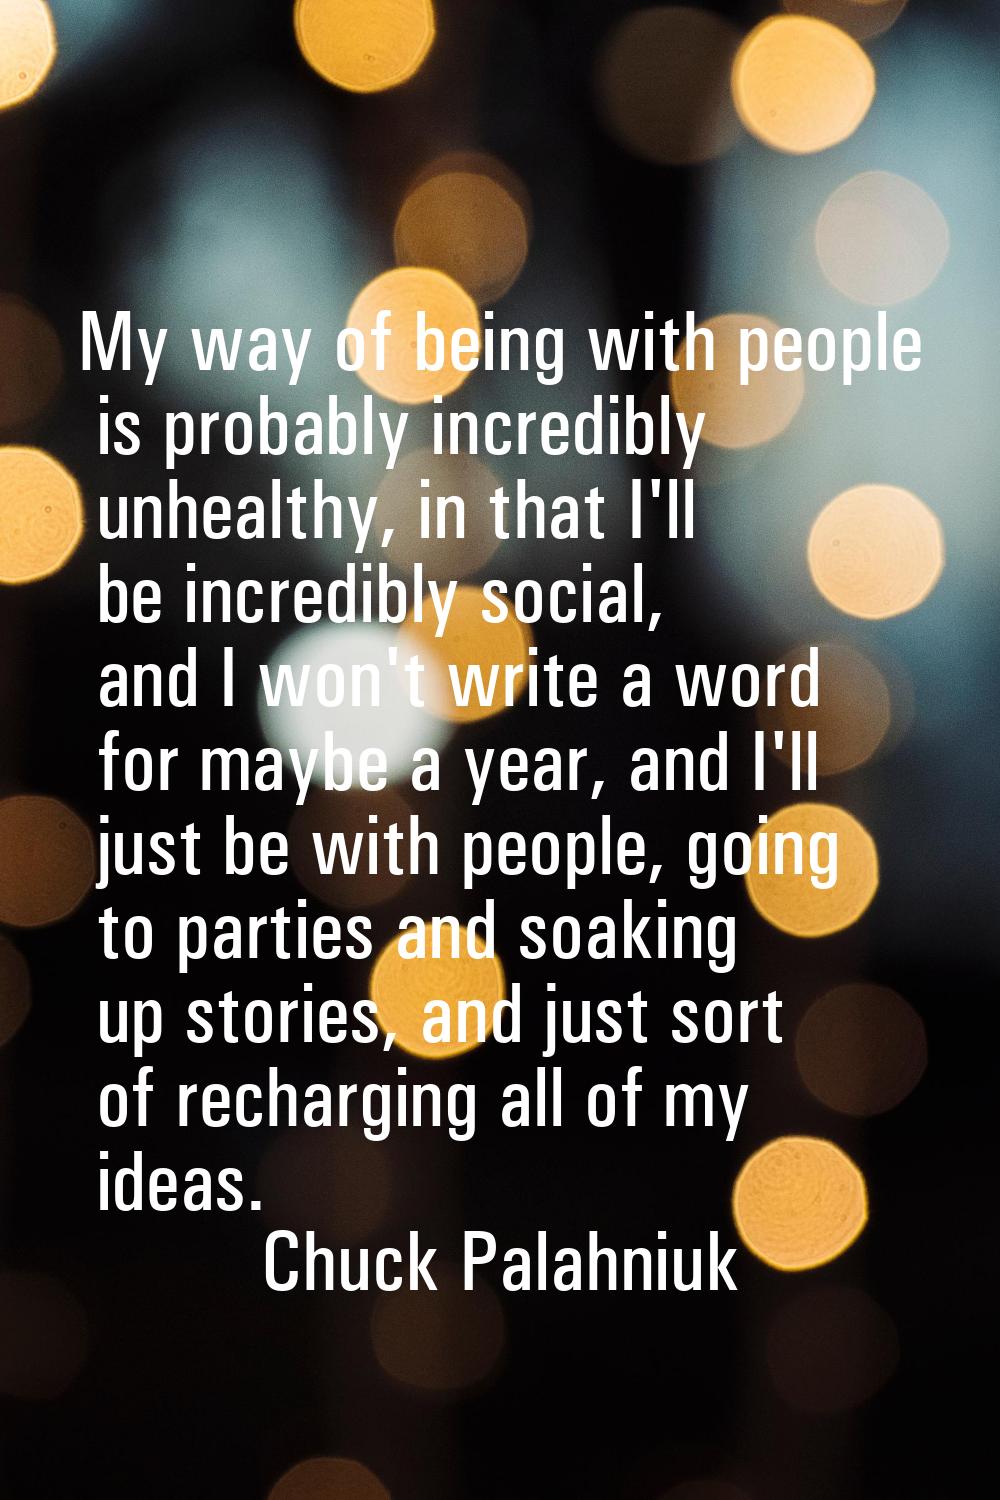 My way of being with people is probably incredibly unhealthy, in that I'll be incredibly social, an